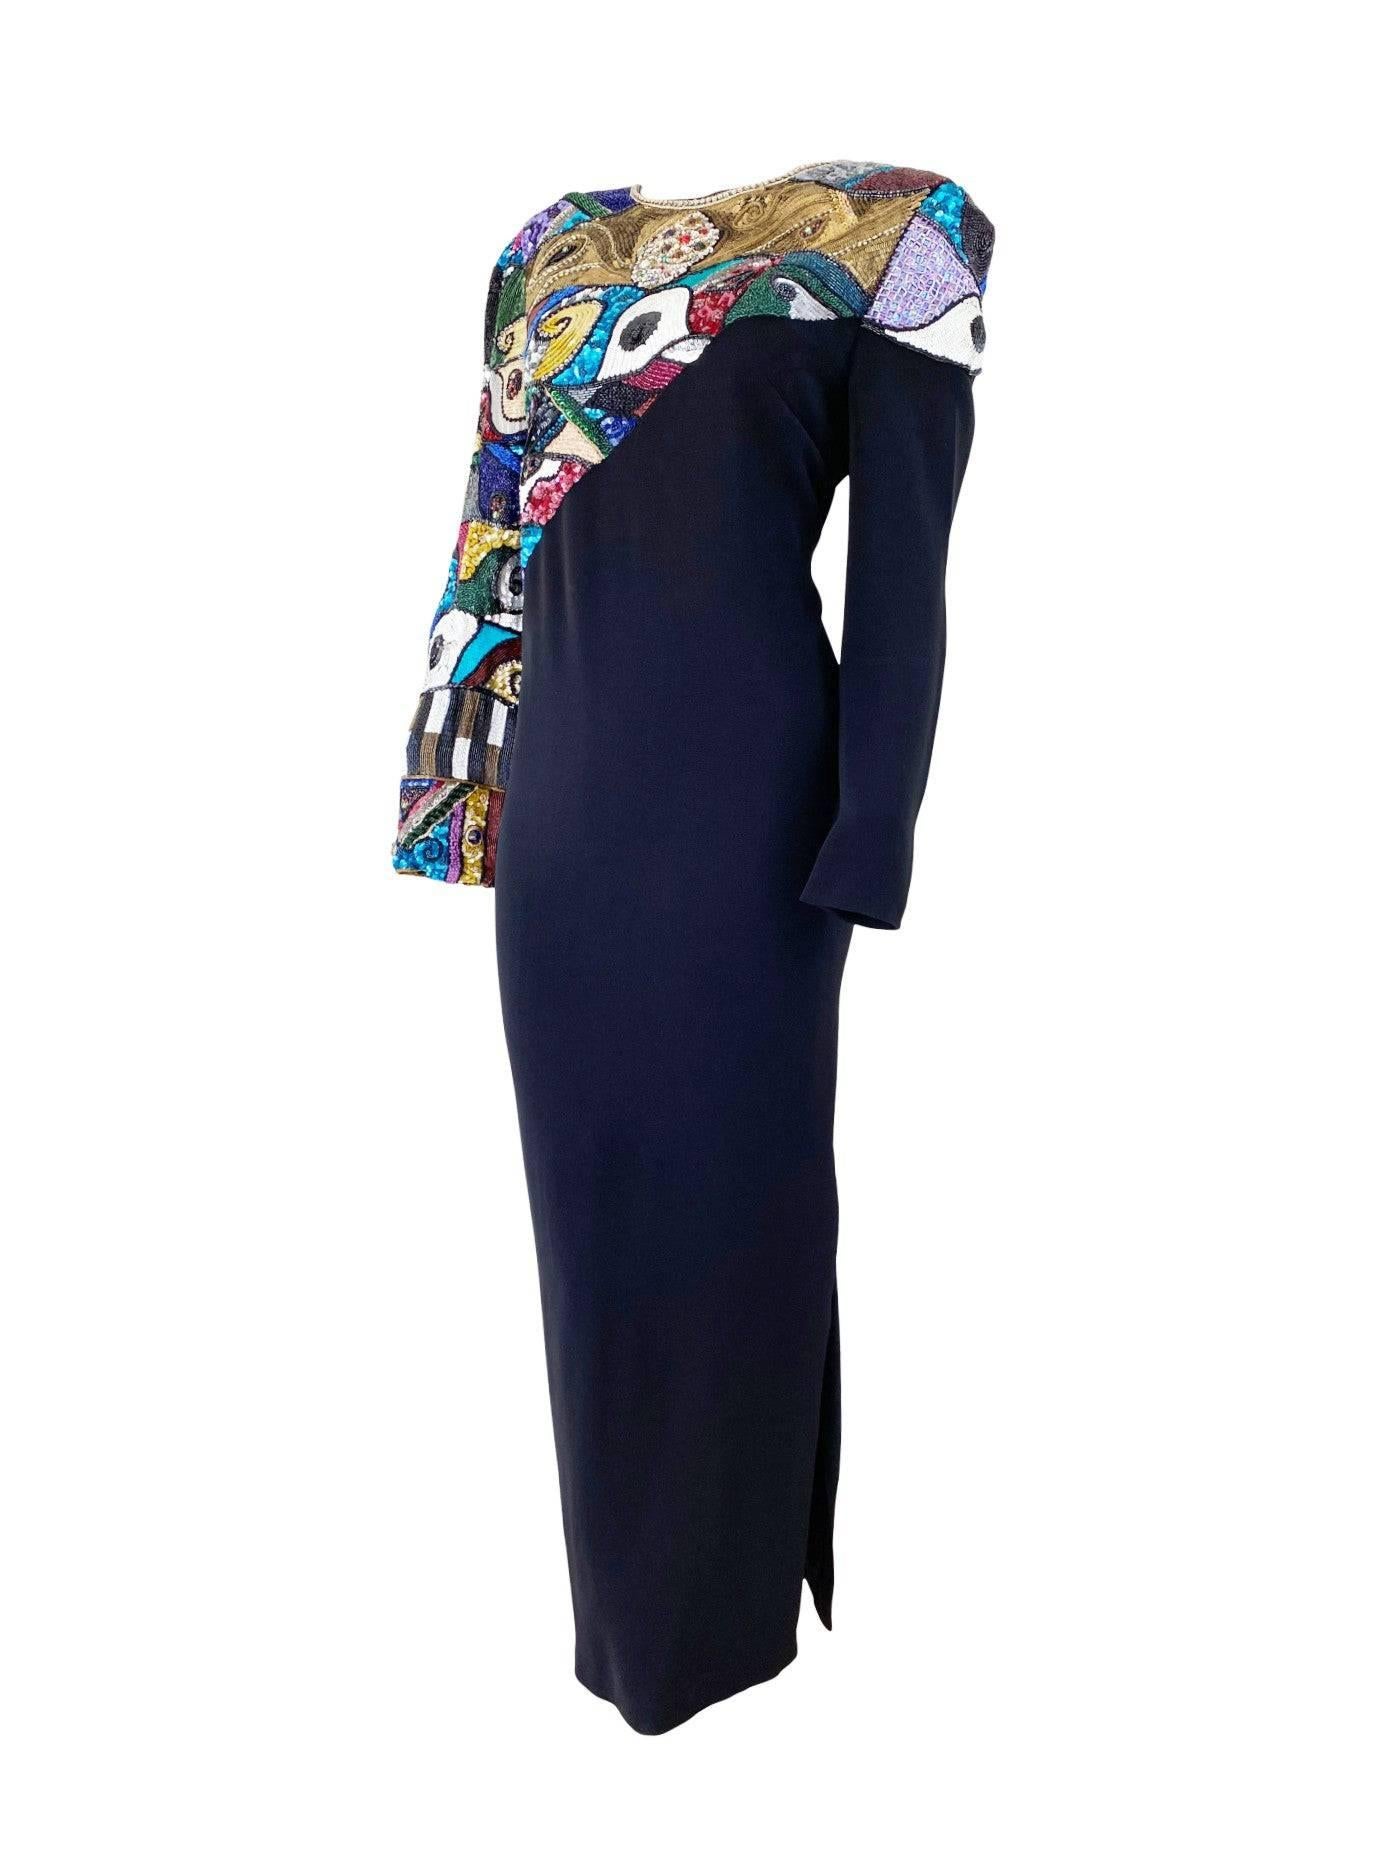 Louis Feraud Vintage 1980s Picasso-Inspired Mosaic Beaded Evening Dress MED In Excellent Condition For Sale In North Attleboro, MA